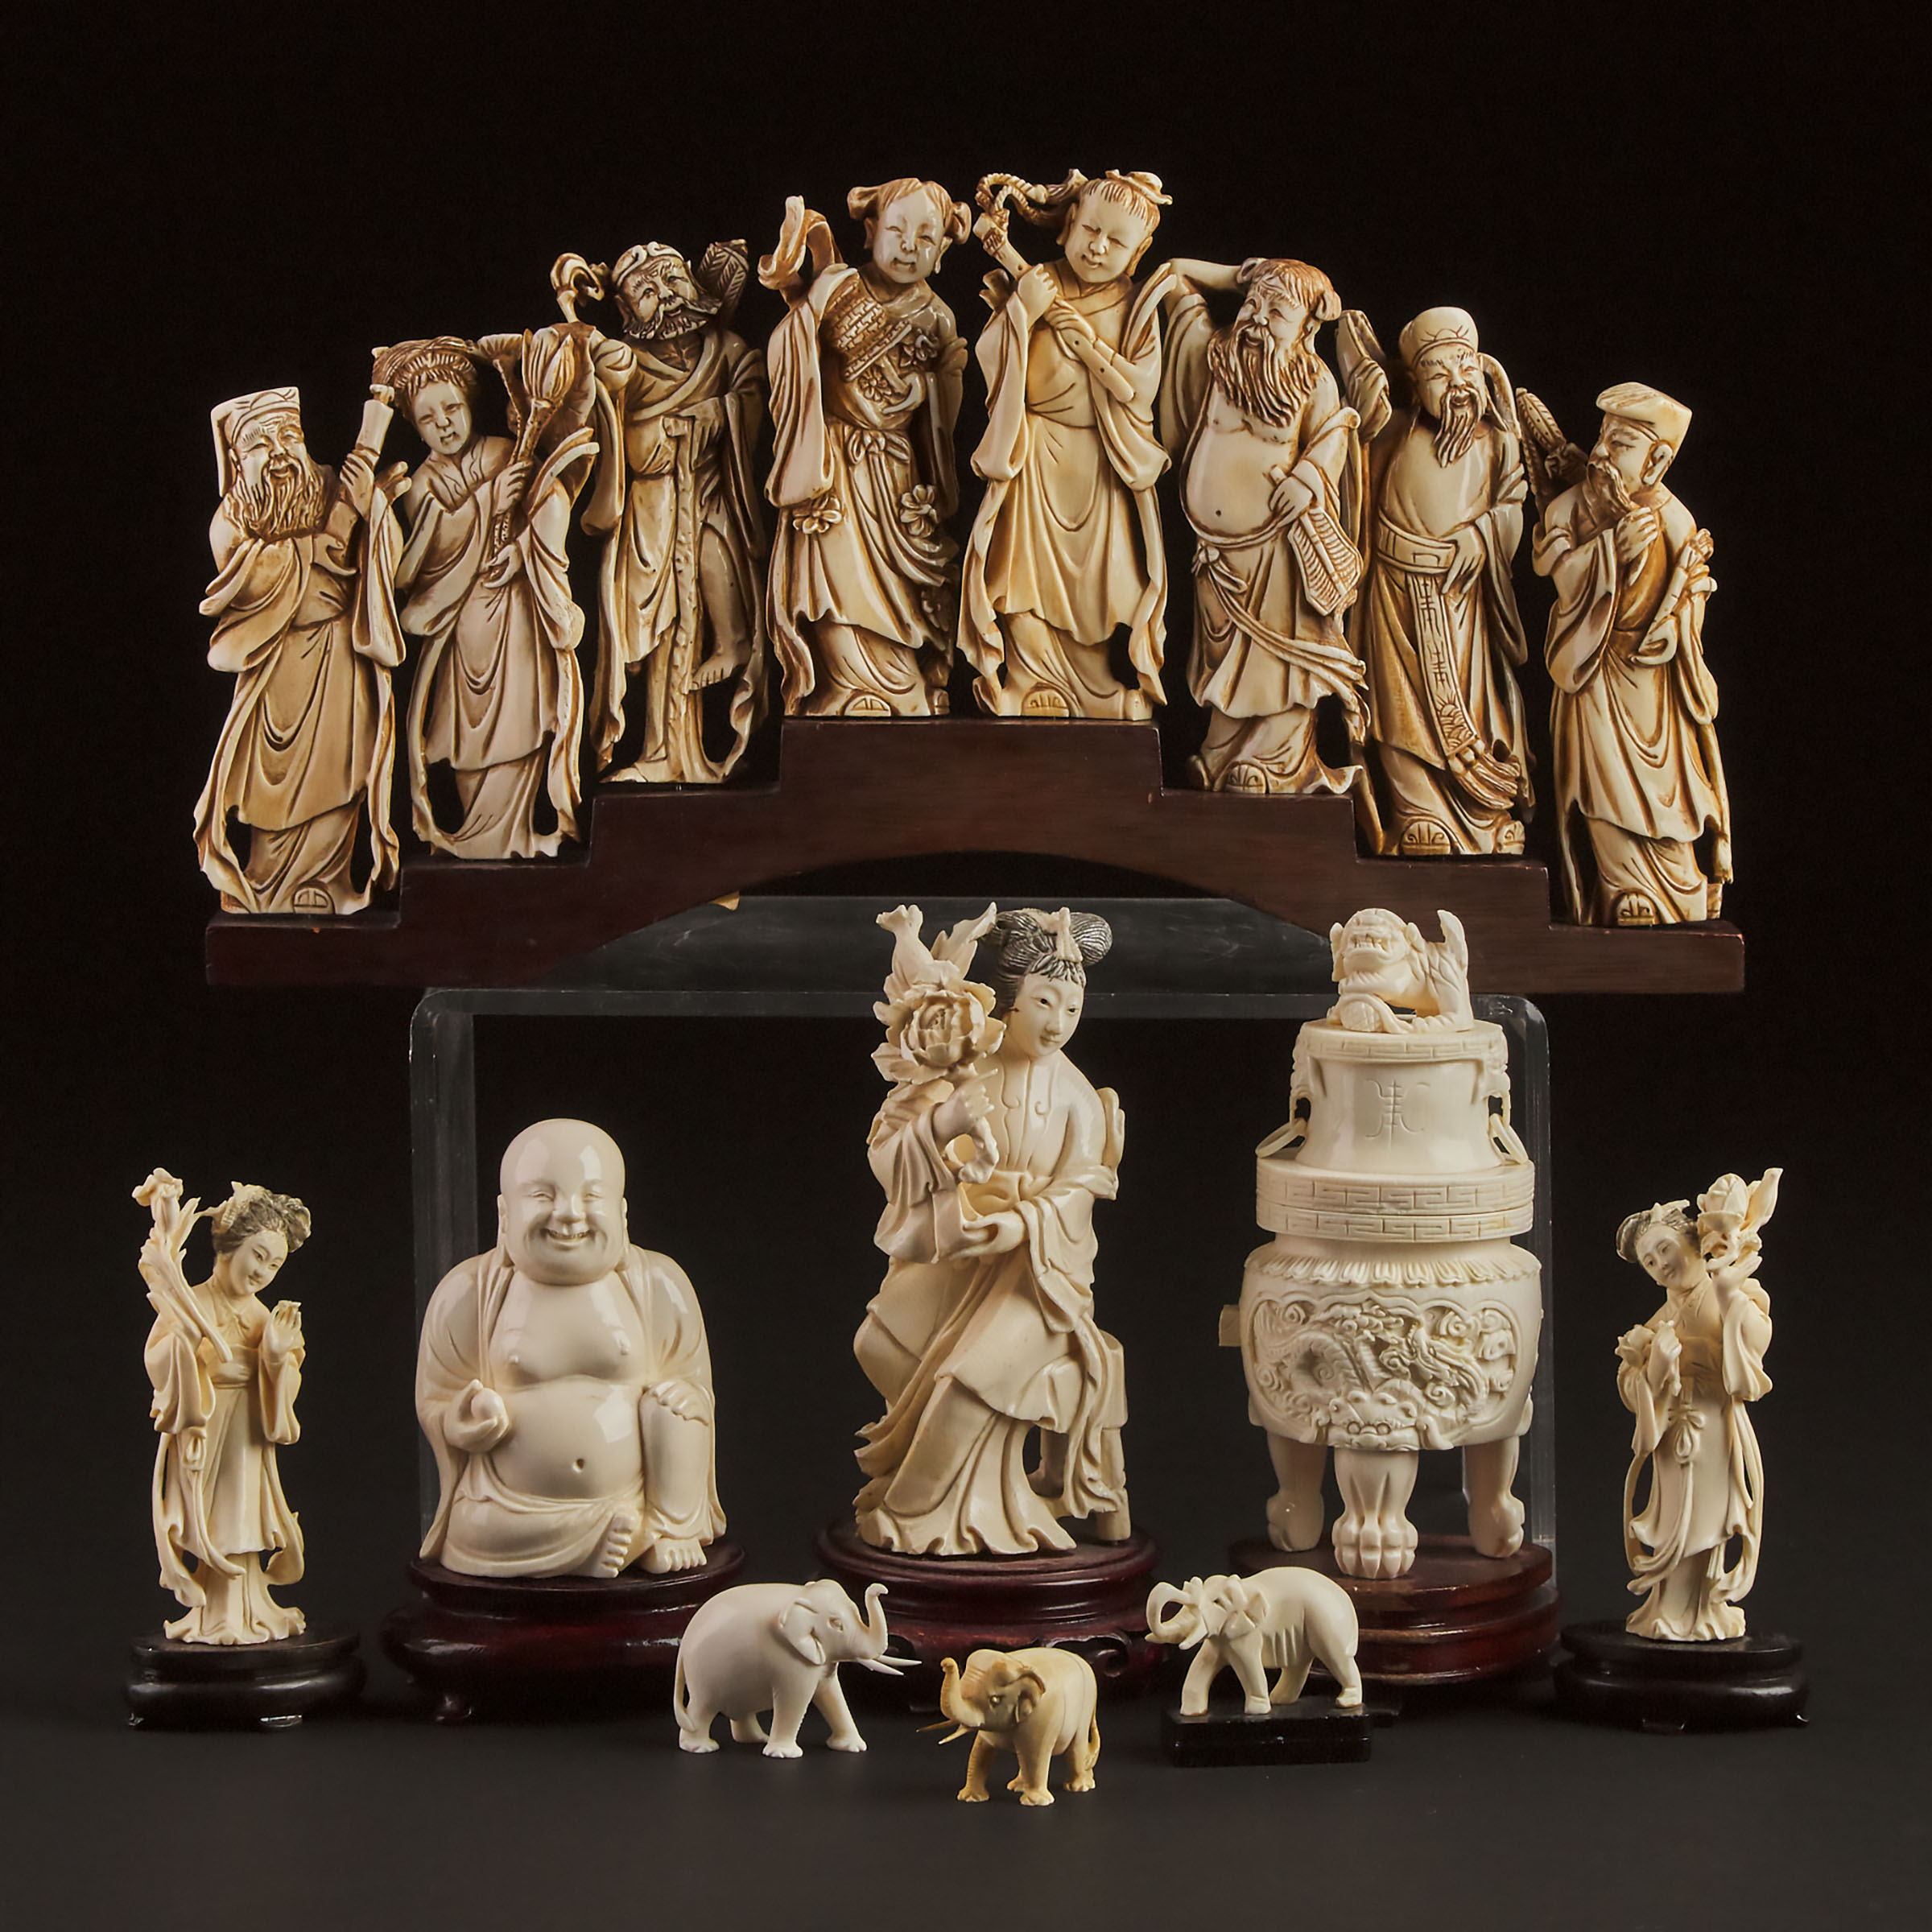 A Group of Nine Chinese Ivory Carvings, Early to Mid 20th Century